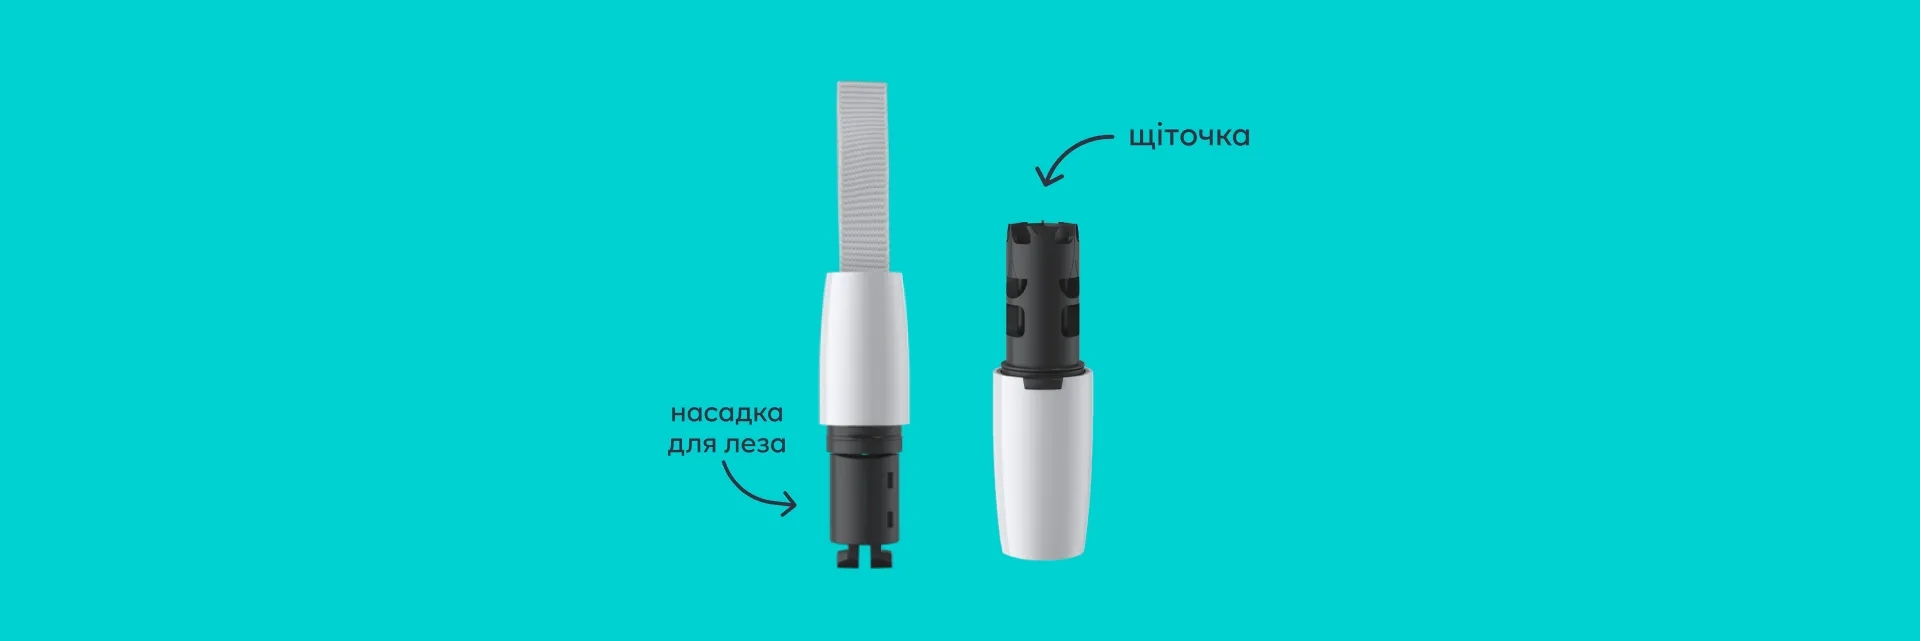 new-cleaning-brush-for-iqos